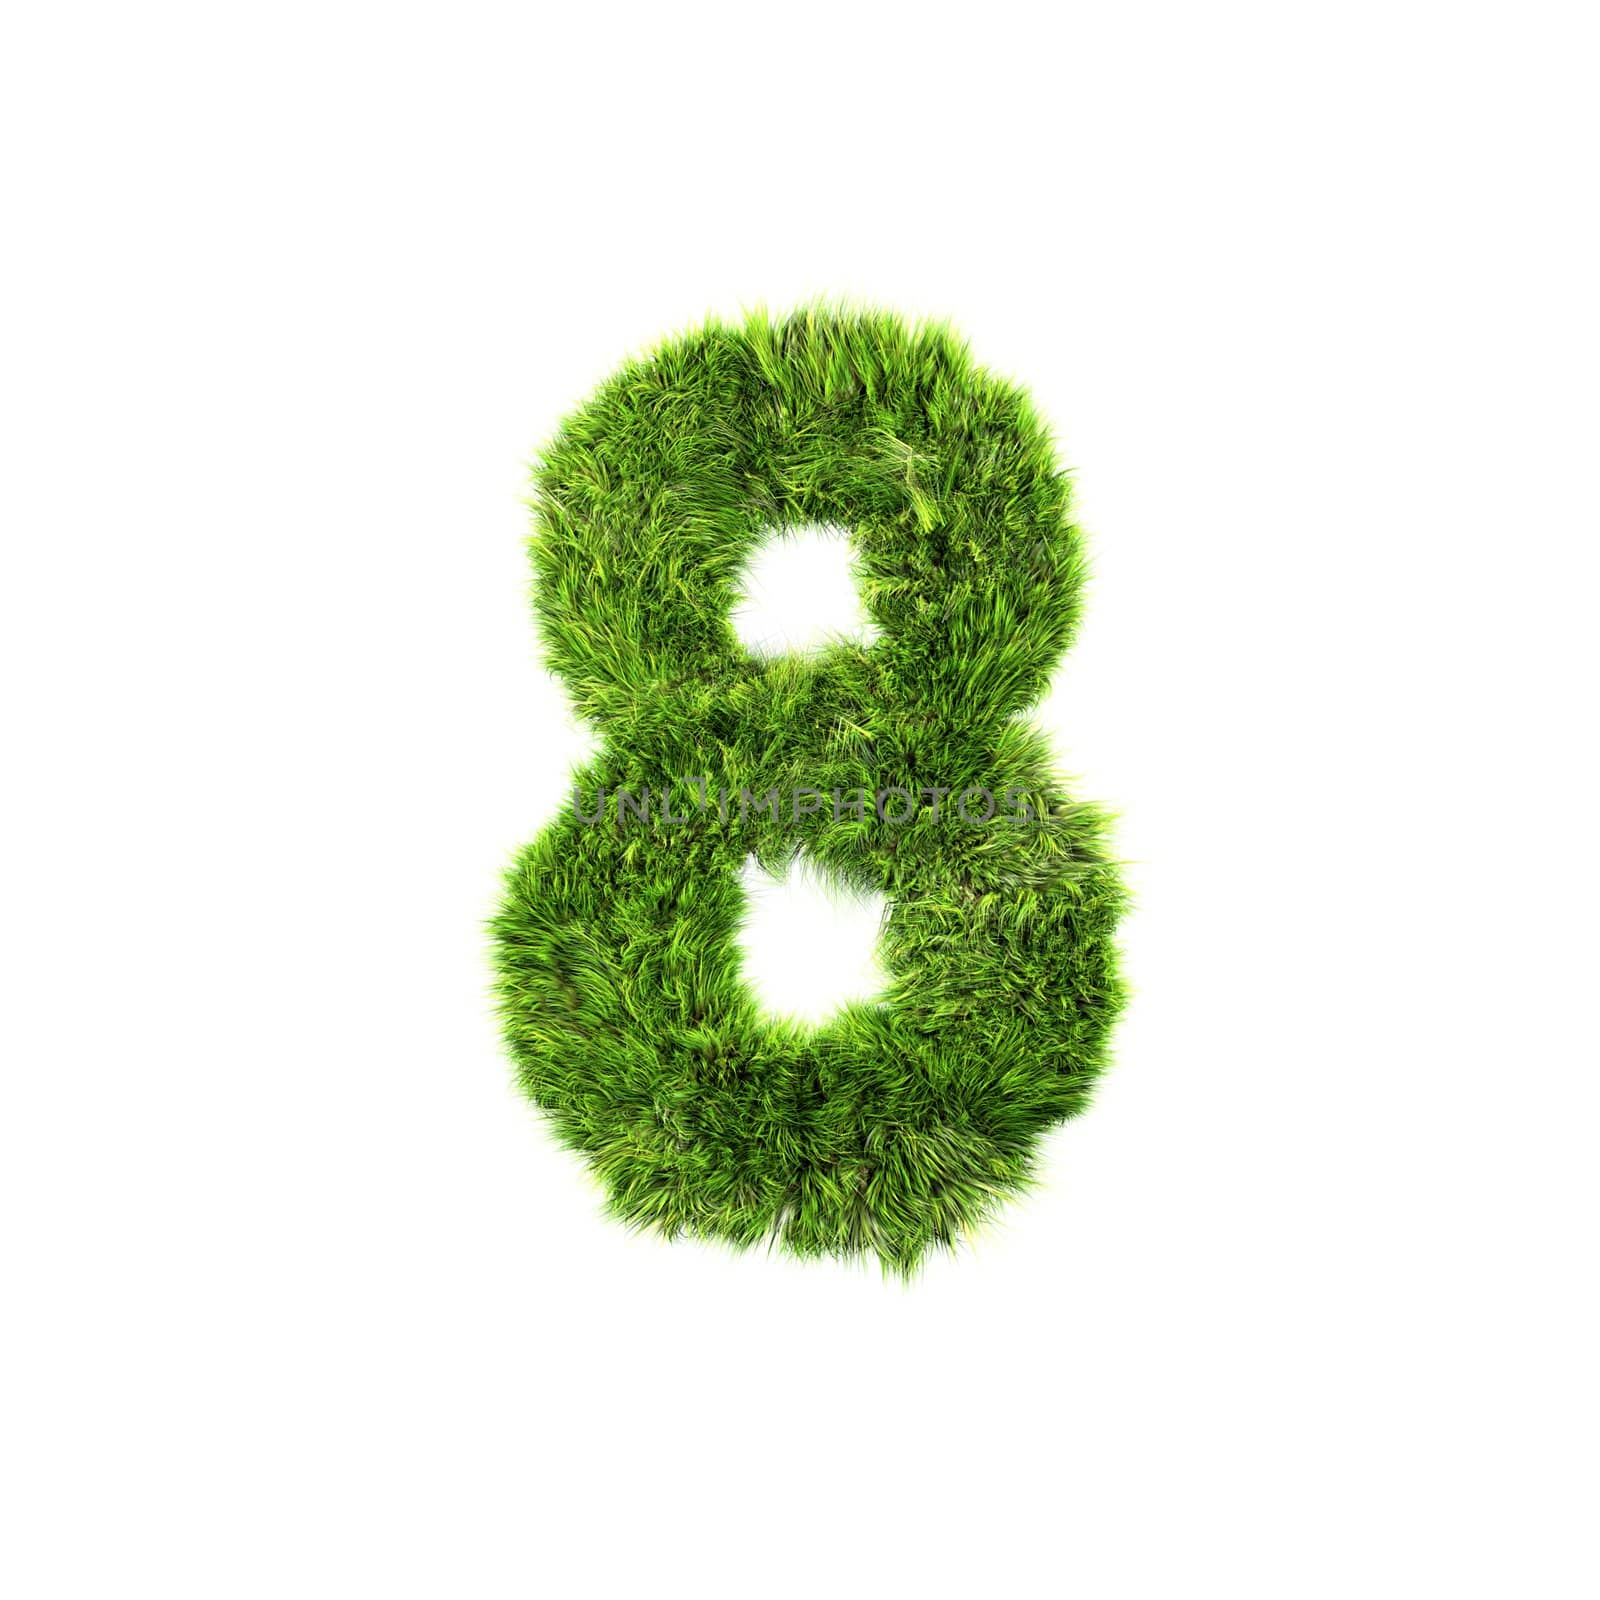 3d grass digit isolated on a white background - 8 by chrisroll